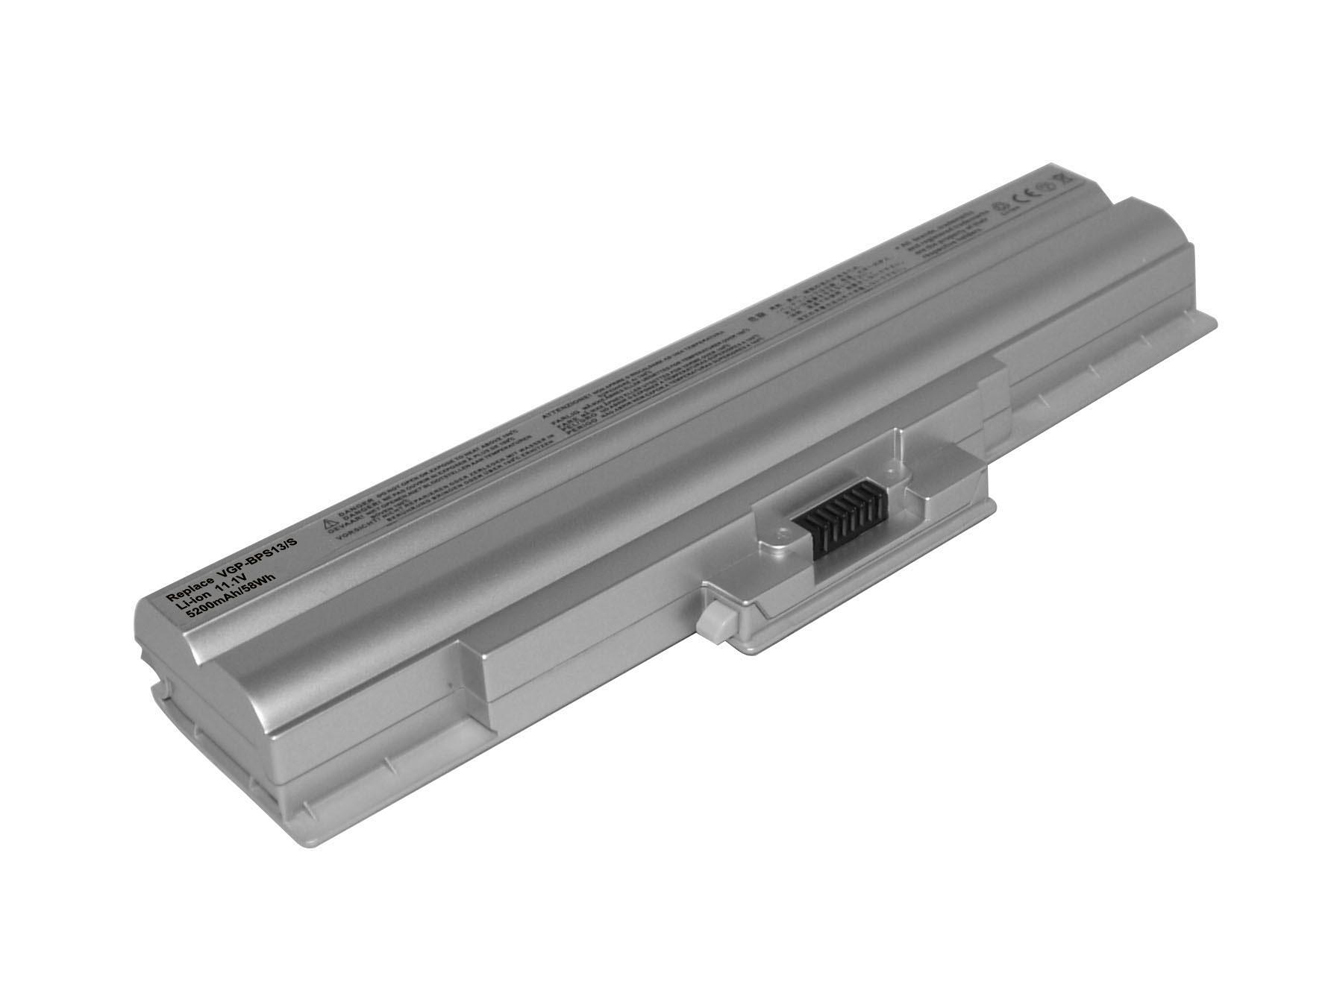 VGP-BPS13/S, VGP-BPS13A/S replacement Laptop Battery for Sony VAIO VPC-S115FG, VAIO VGN-AW53FB, 6 cells, 5200mAh, 11.10V